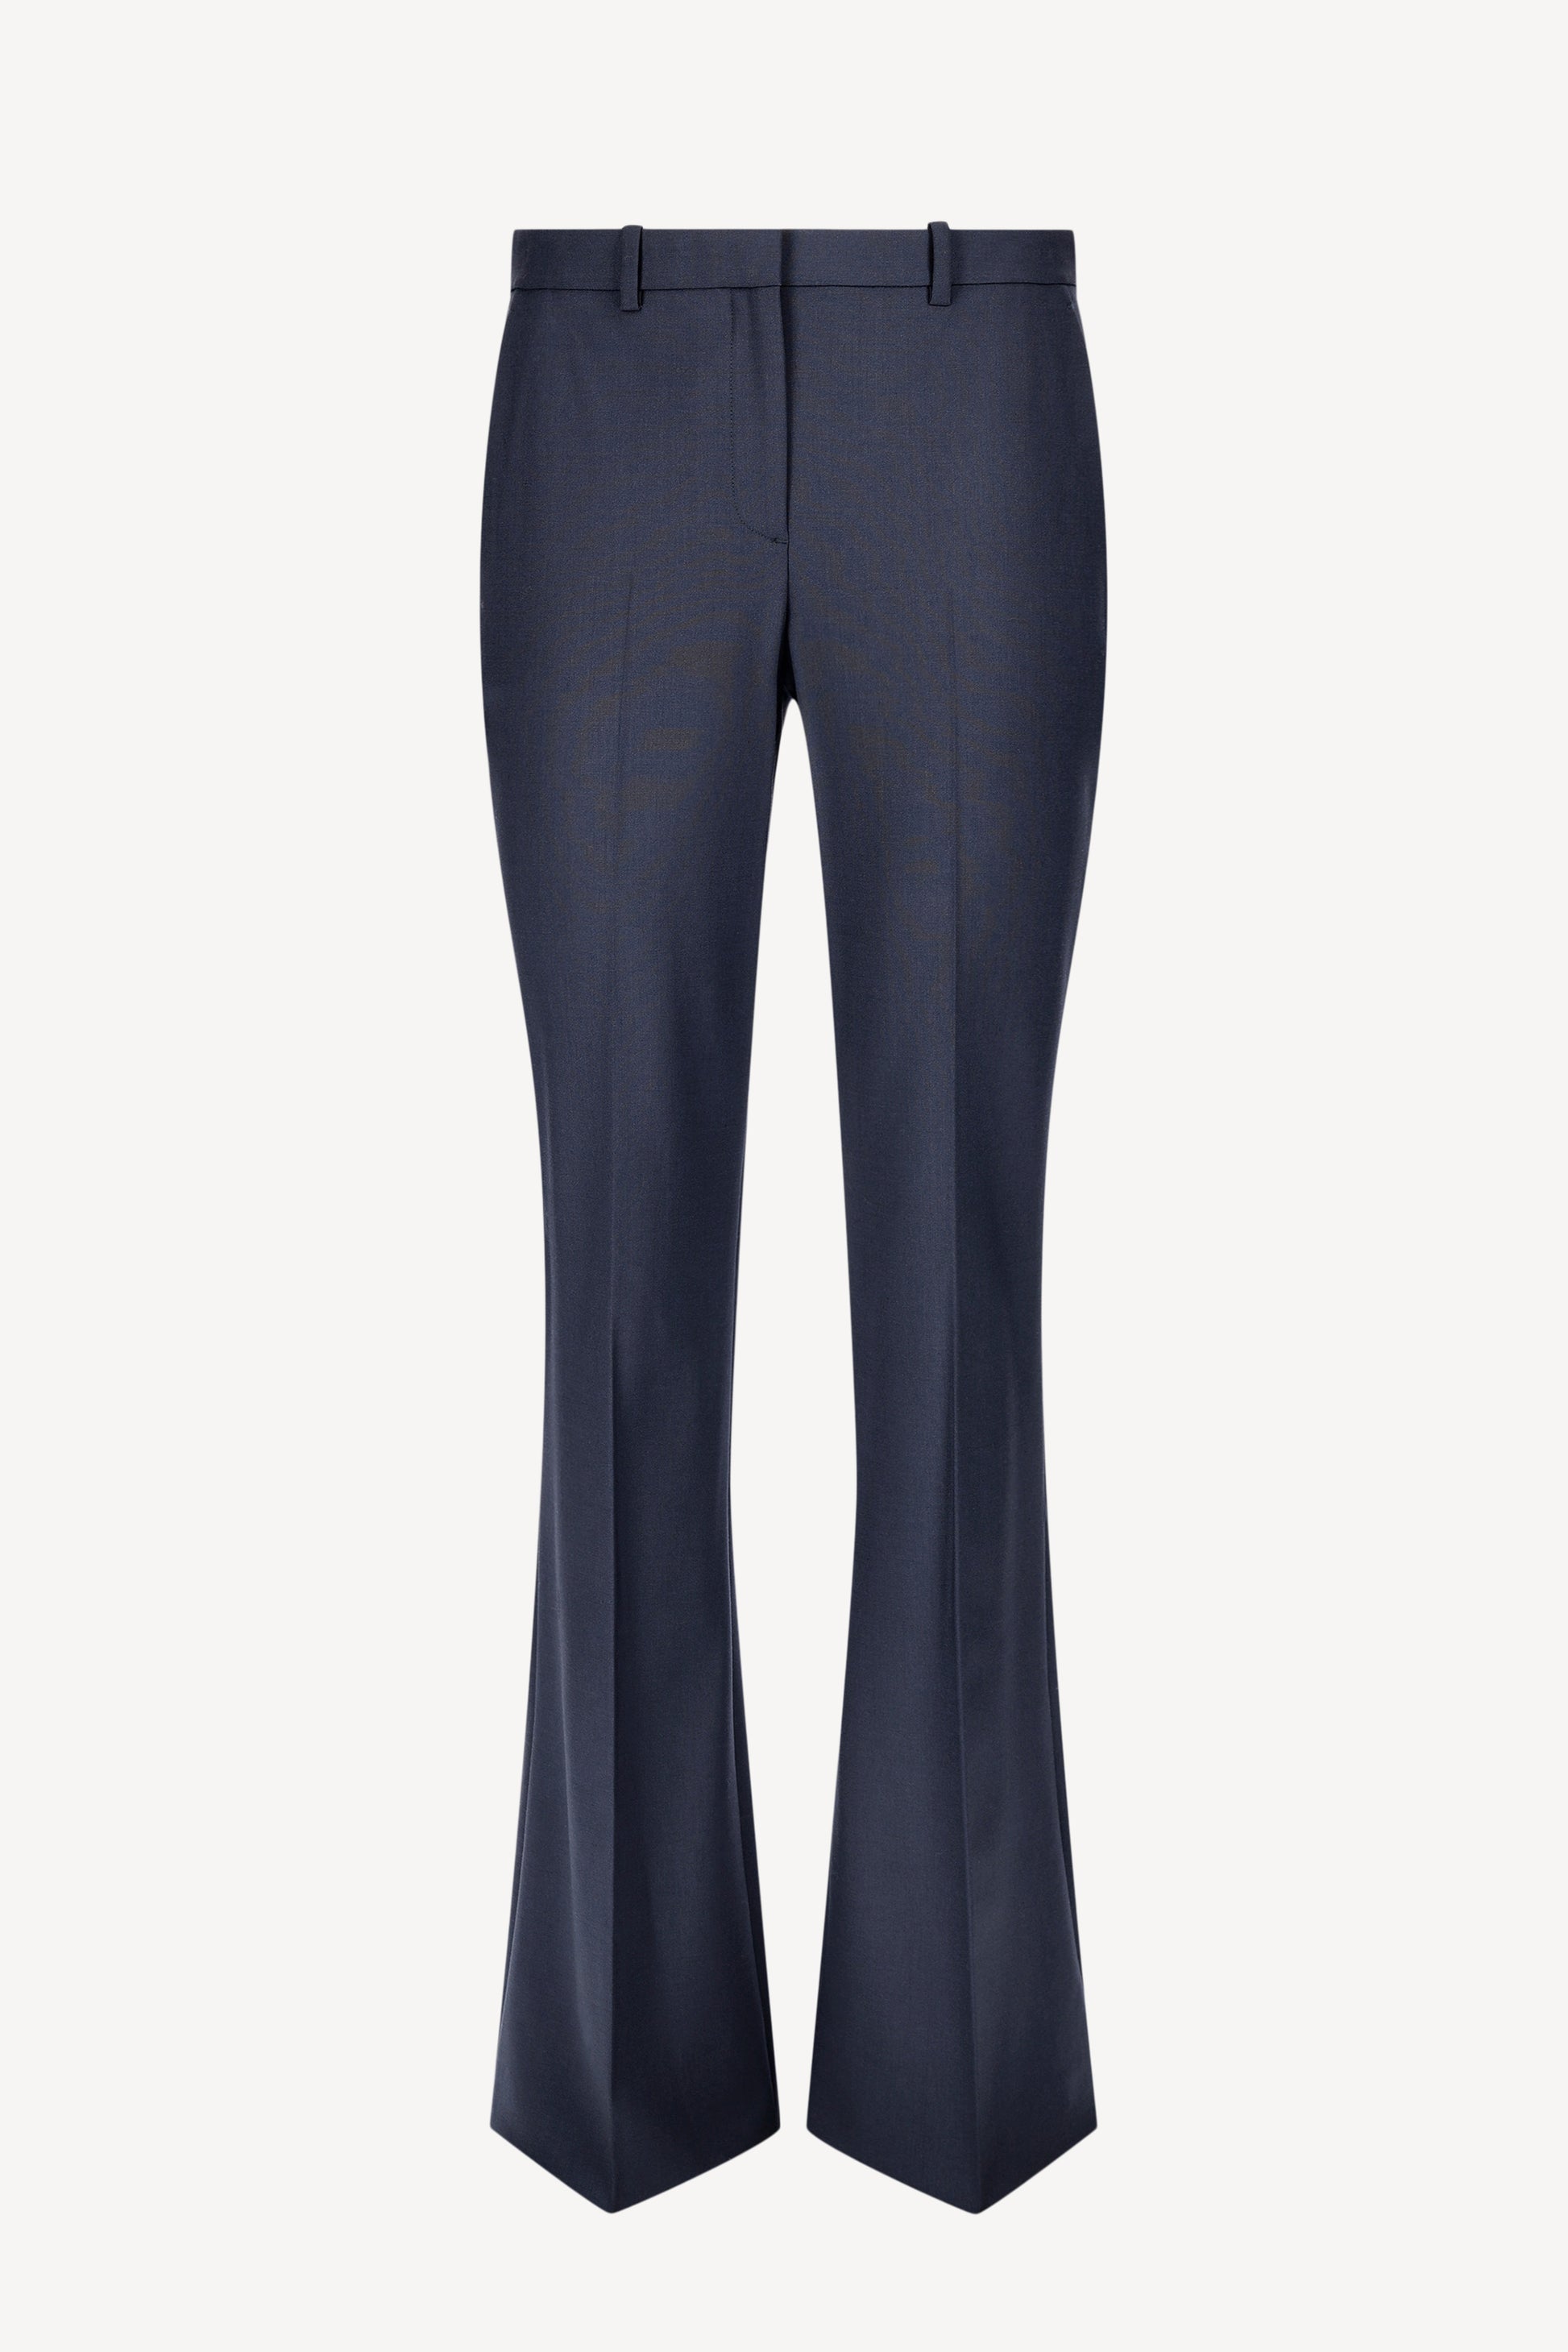 Pants Demitria Mid in Nocturne Navy